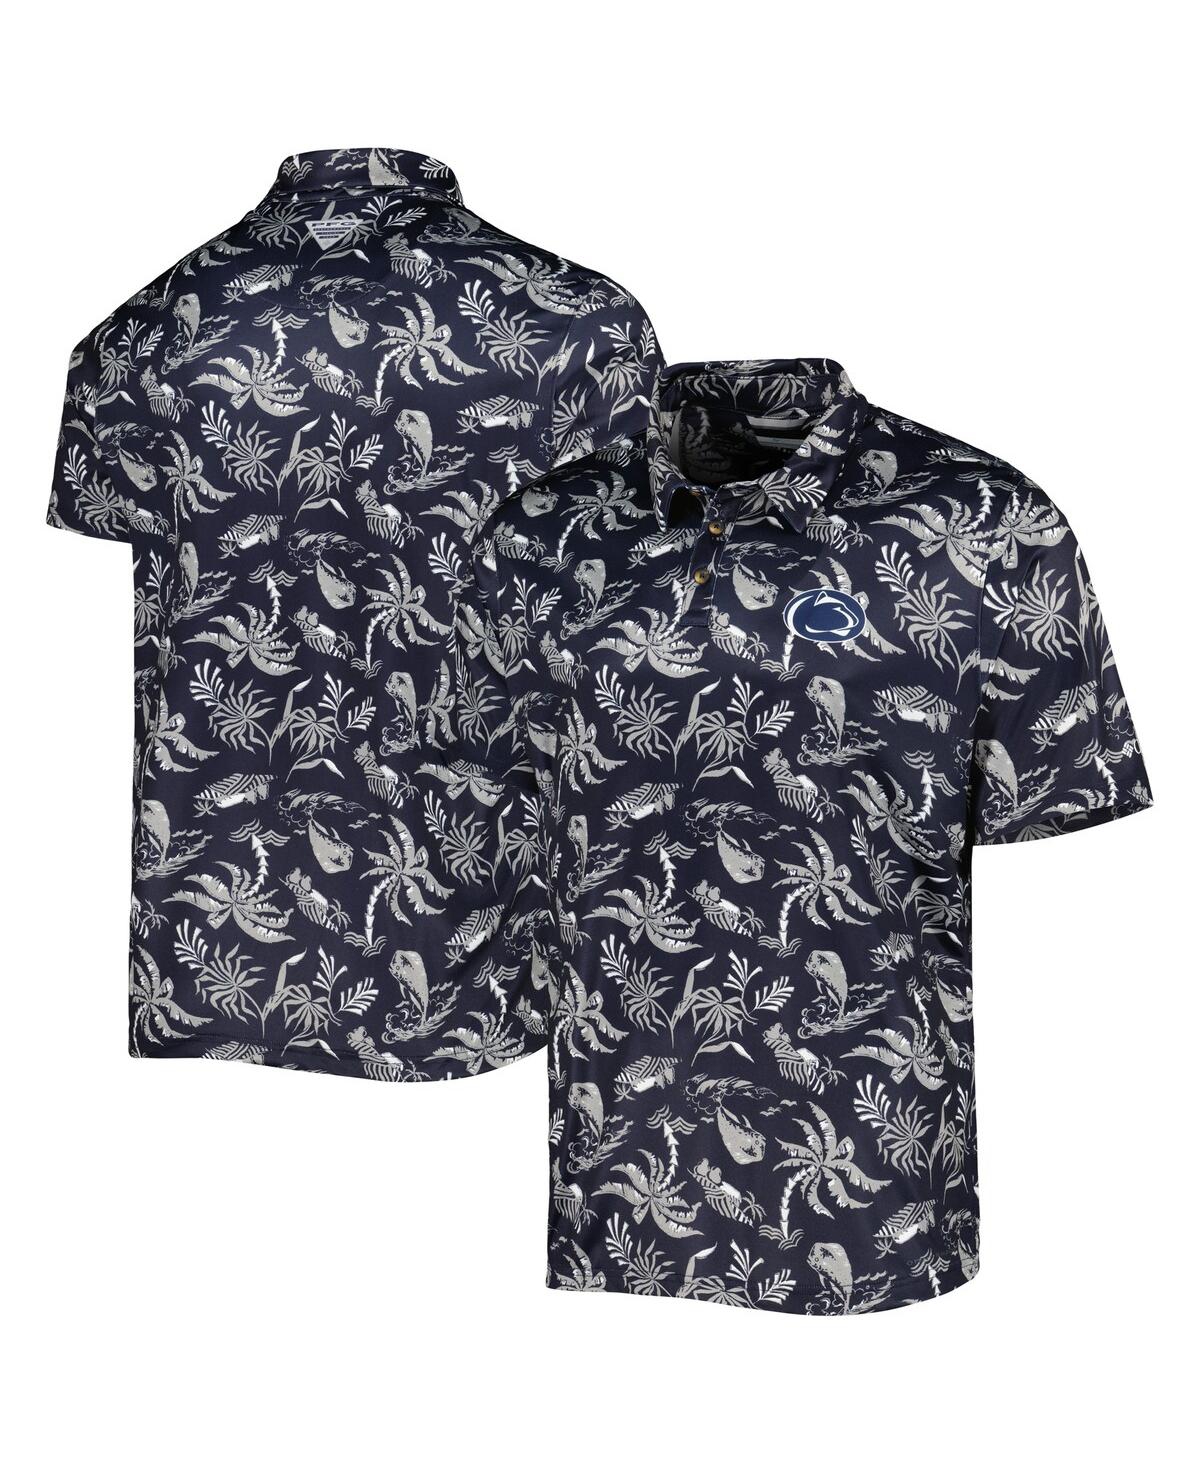 Men's Columbia Navy Penn State Nittany Lions Super Terminal Tackle Omni-Shade Polo Shirt - Navy